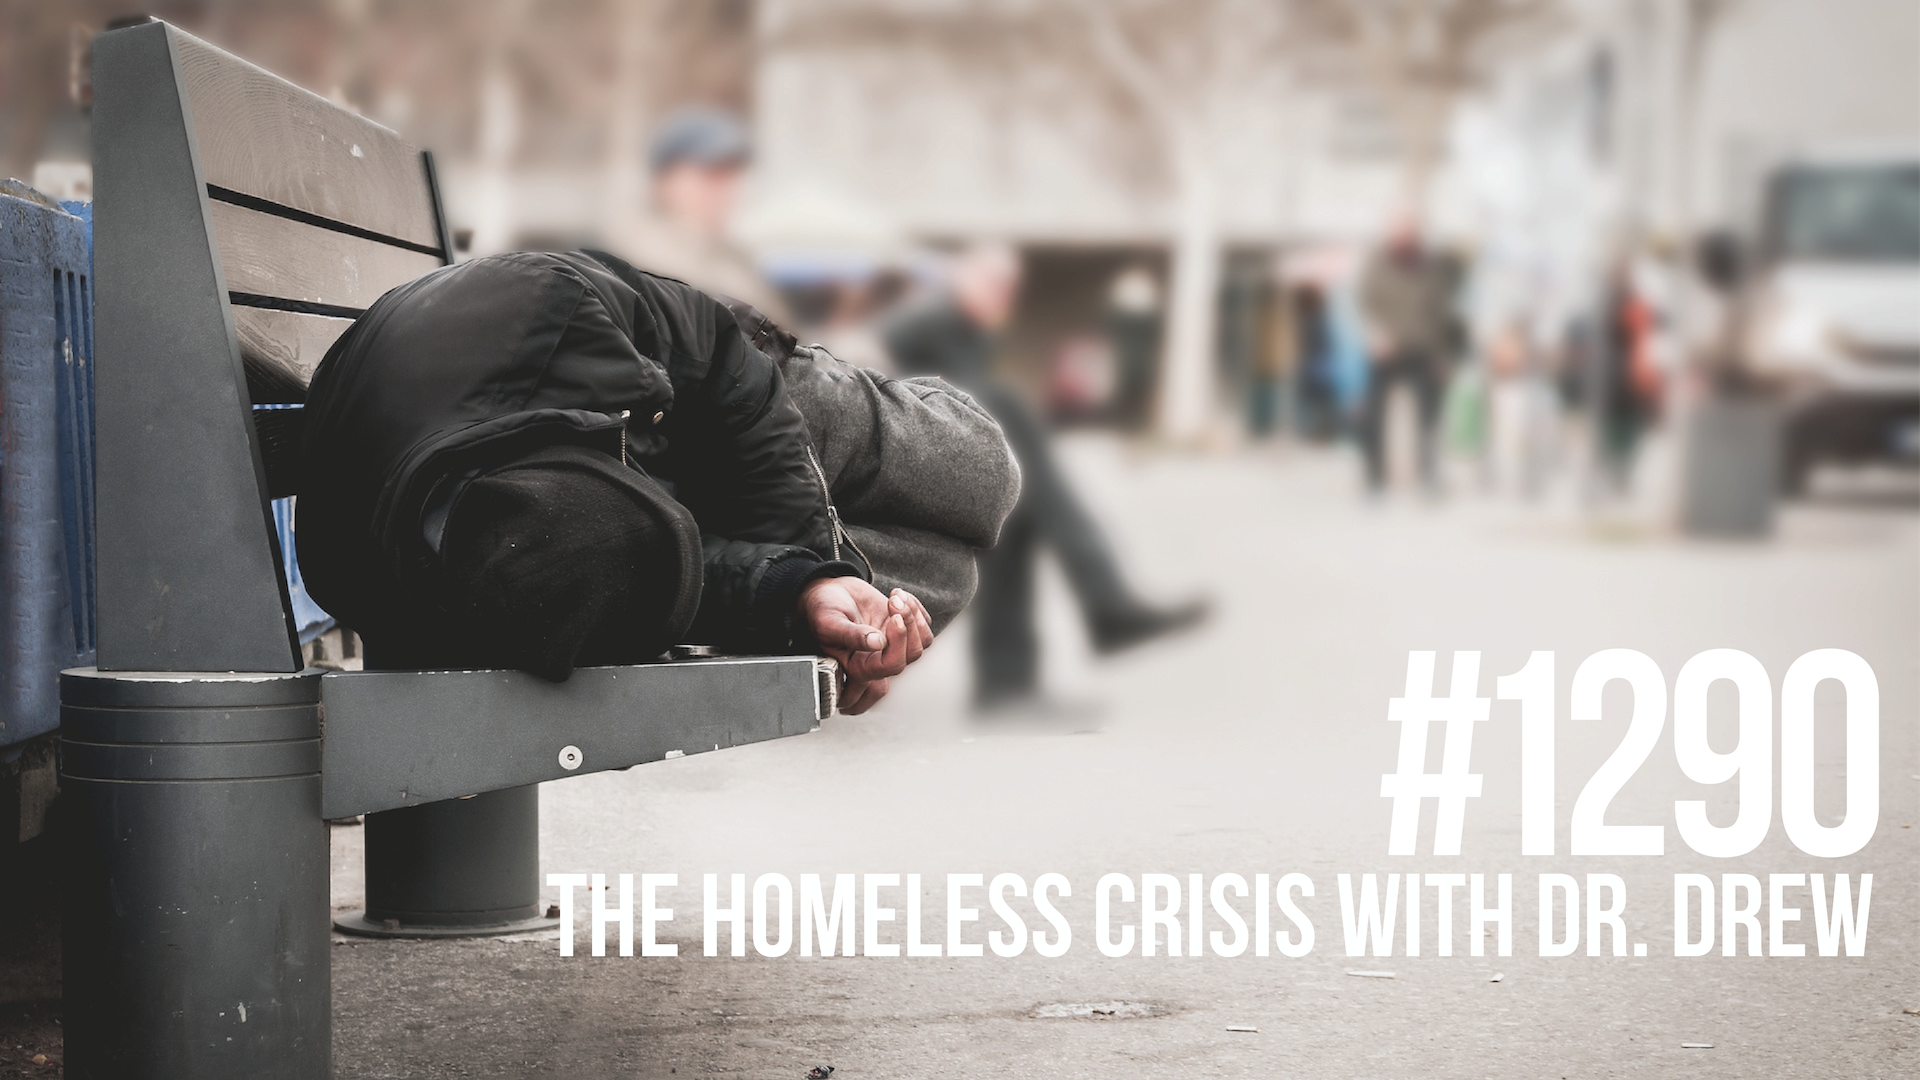 1290: The Homeless Crisis With Dr. Drew